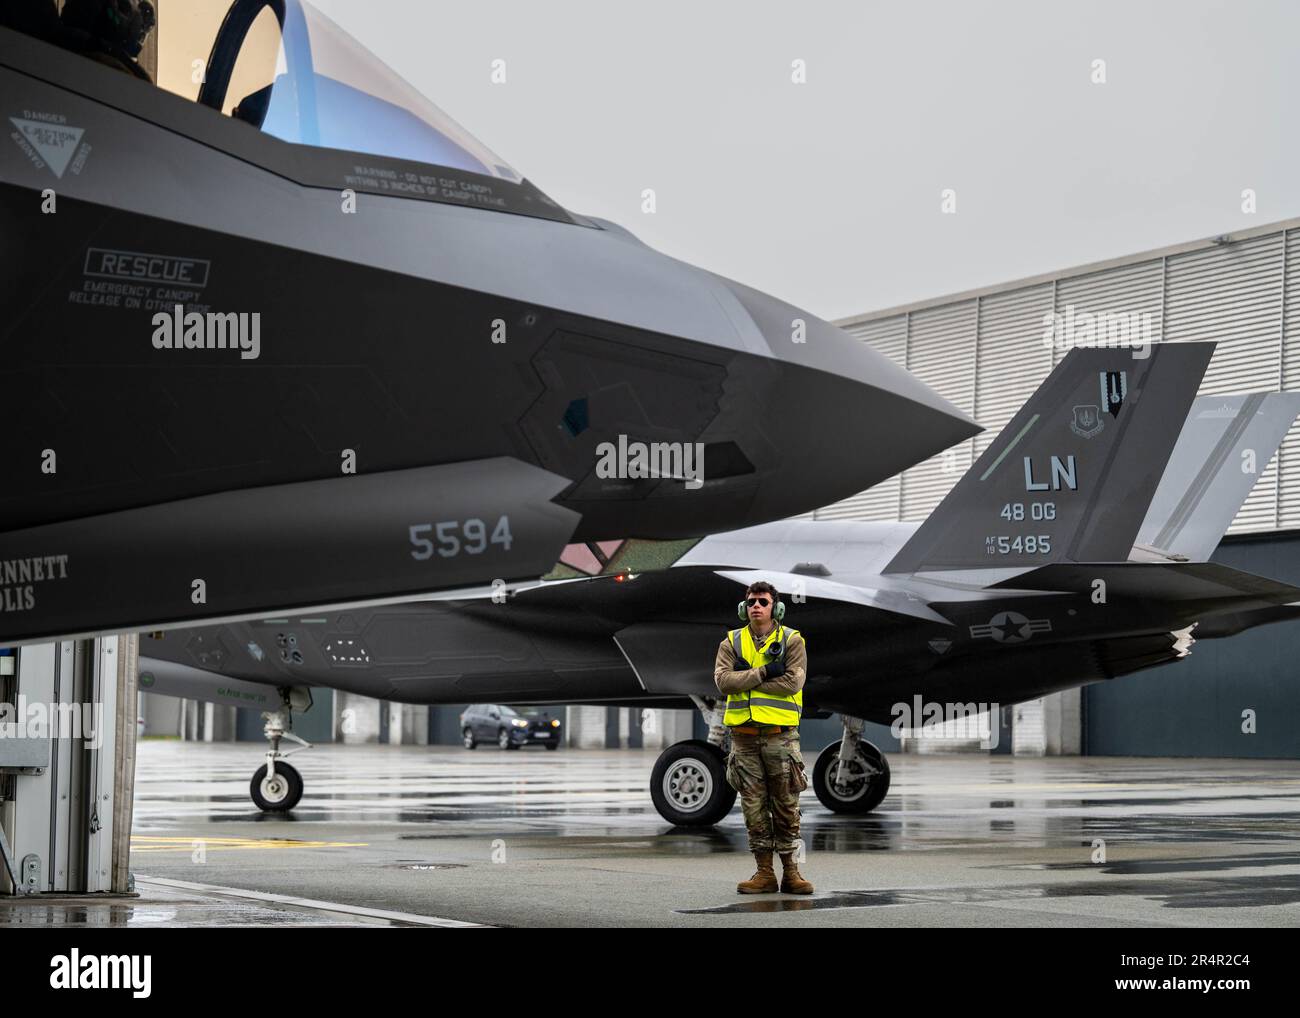 U.S. Air Force Airman Robbie Lettieri, assistant dedicated crew chief assigned to the 493rd Fighter Squadron, marshalls an F-35A Lightning II onto the taxiway for the kick-off of Arctic Challenge Exercise 2023 at Ørland Air Base, Norway, May 29, 2023. The advanced fifth-generation fighter will integrate and operate alongside 13 nations and NATO throughout the exercise, which provides critical training in a highly complex and harsh Arctic environment. RAF Lakenheath’s ability to forward deploy and operate in routine exercises with the F-35 highlights U.S. European Command’s focus on maintaining Stock Photo